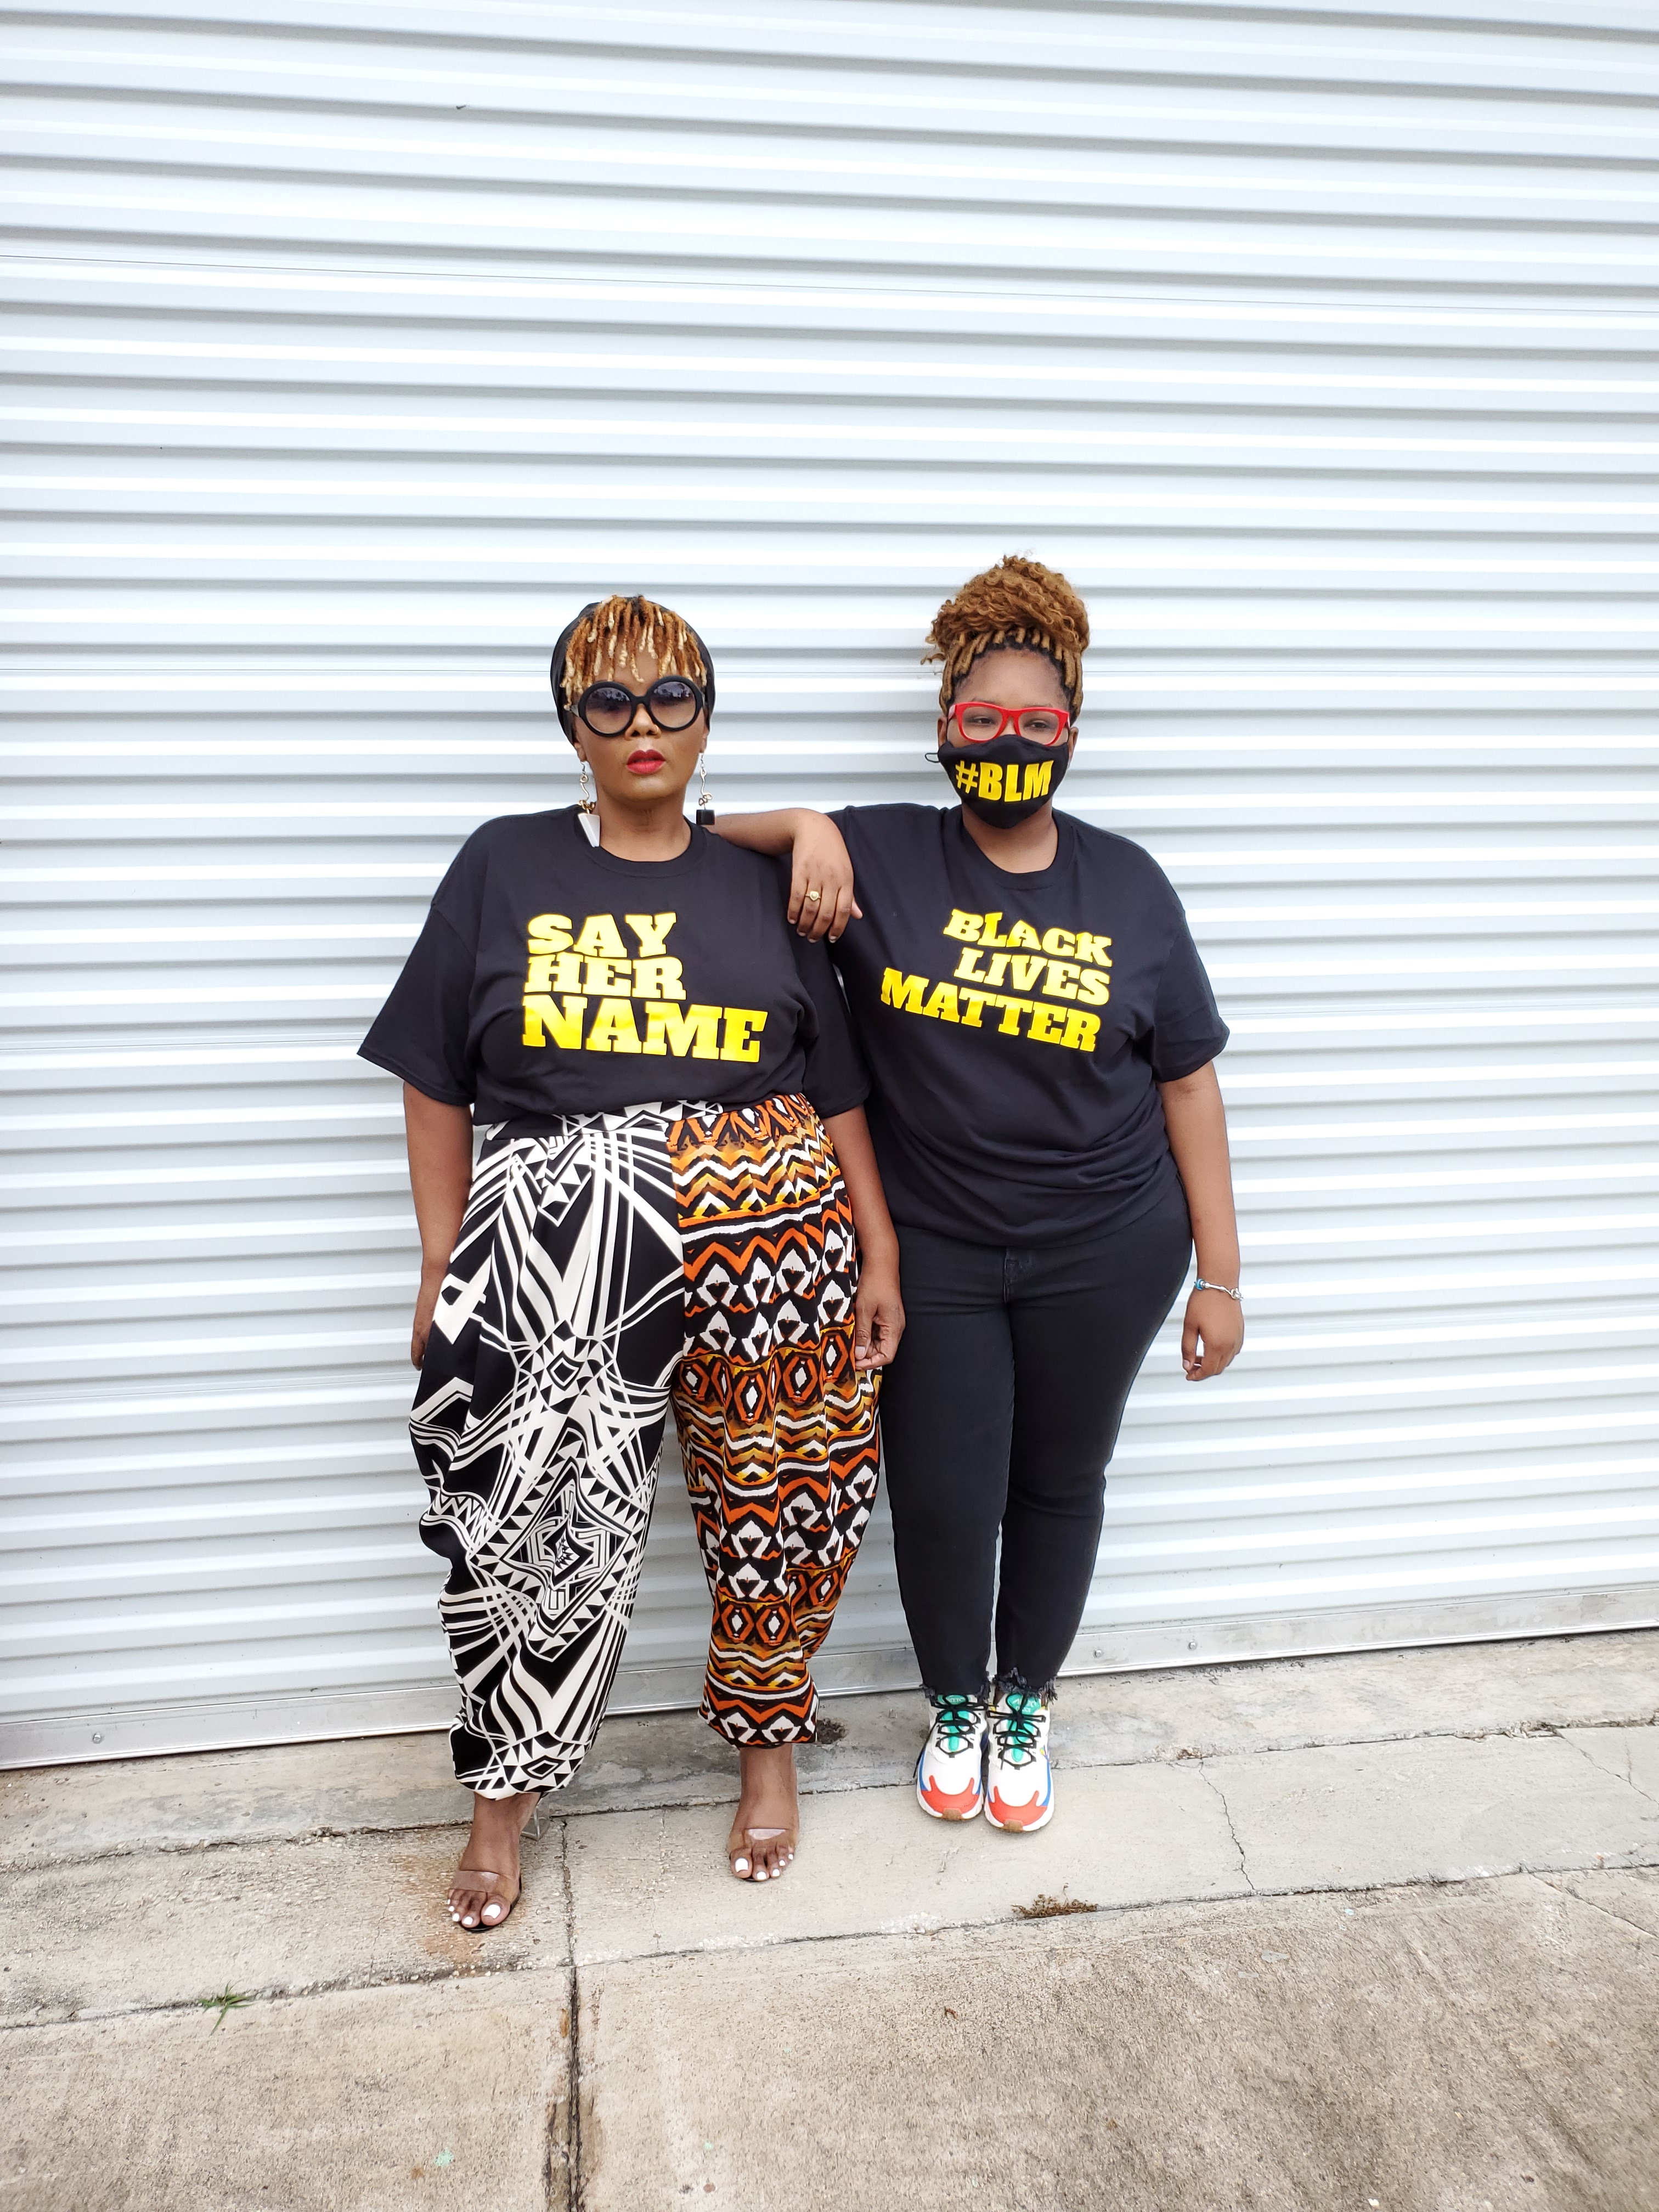 9 Black Owned T Shirt Shops That Are Blackity Black 939 Wkys